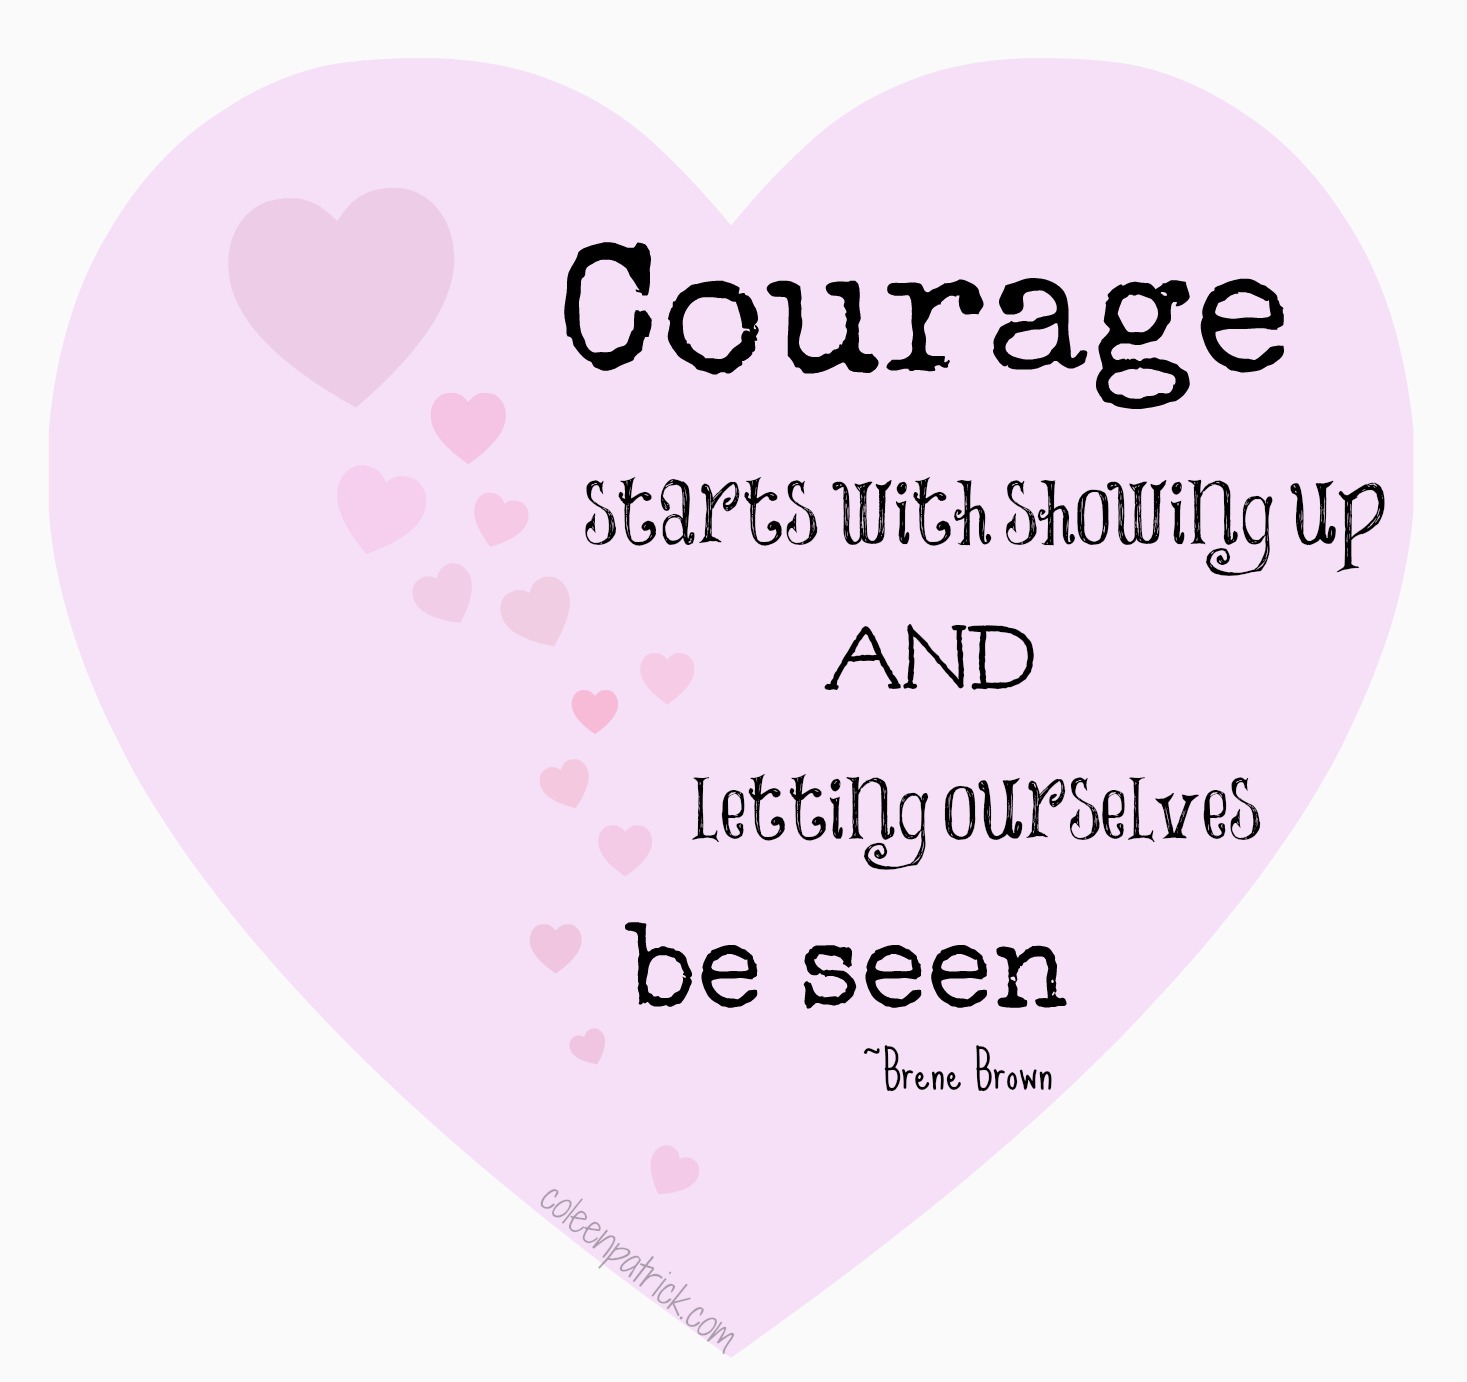 Courage starts with showing up and letting ourselves be seen.